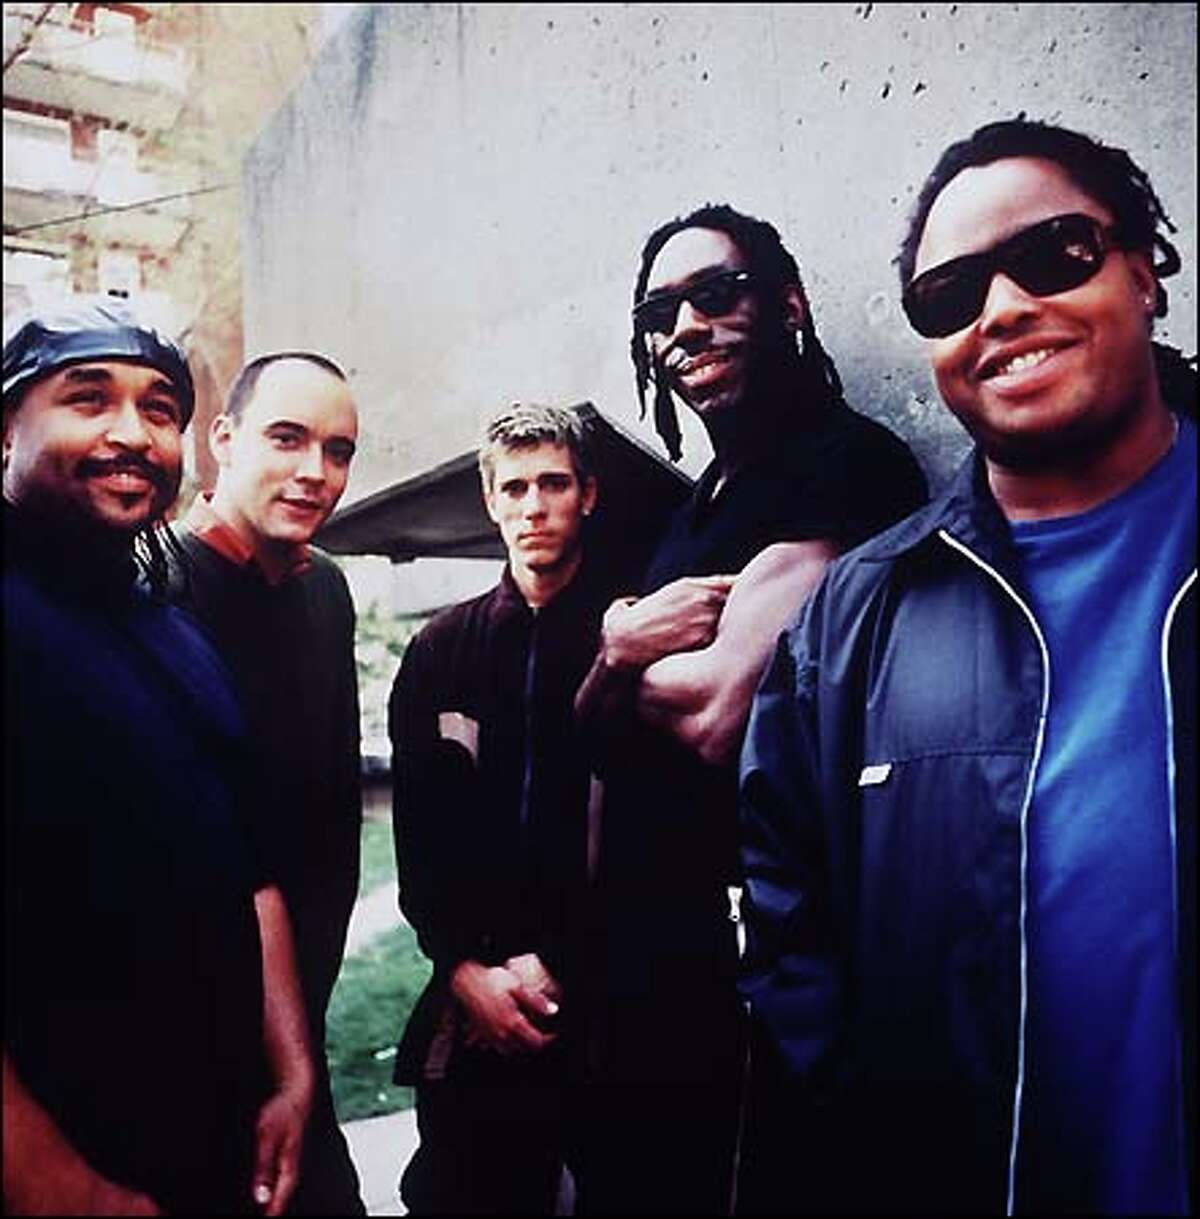 The wildly popular band consists of Stefan Lessard, Carter Beauford, Dave Matthews, Boyd Tinsley and LeRoi Moore.